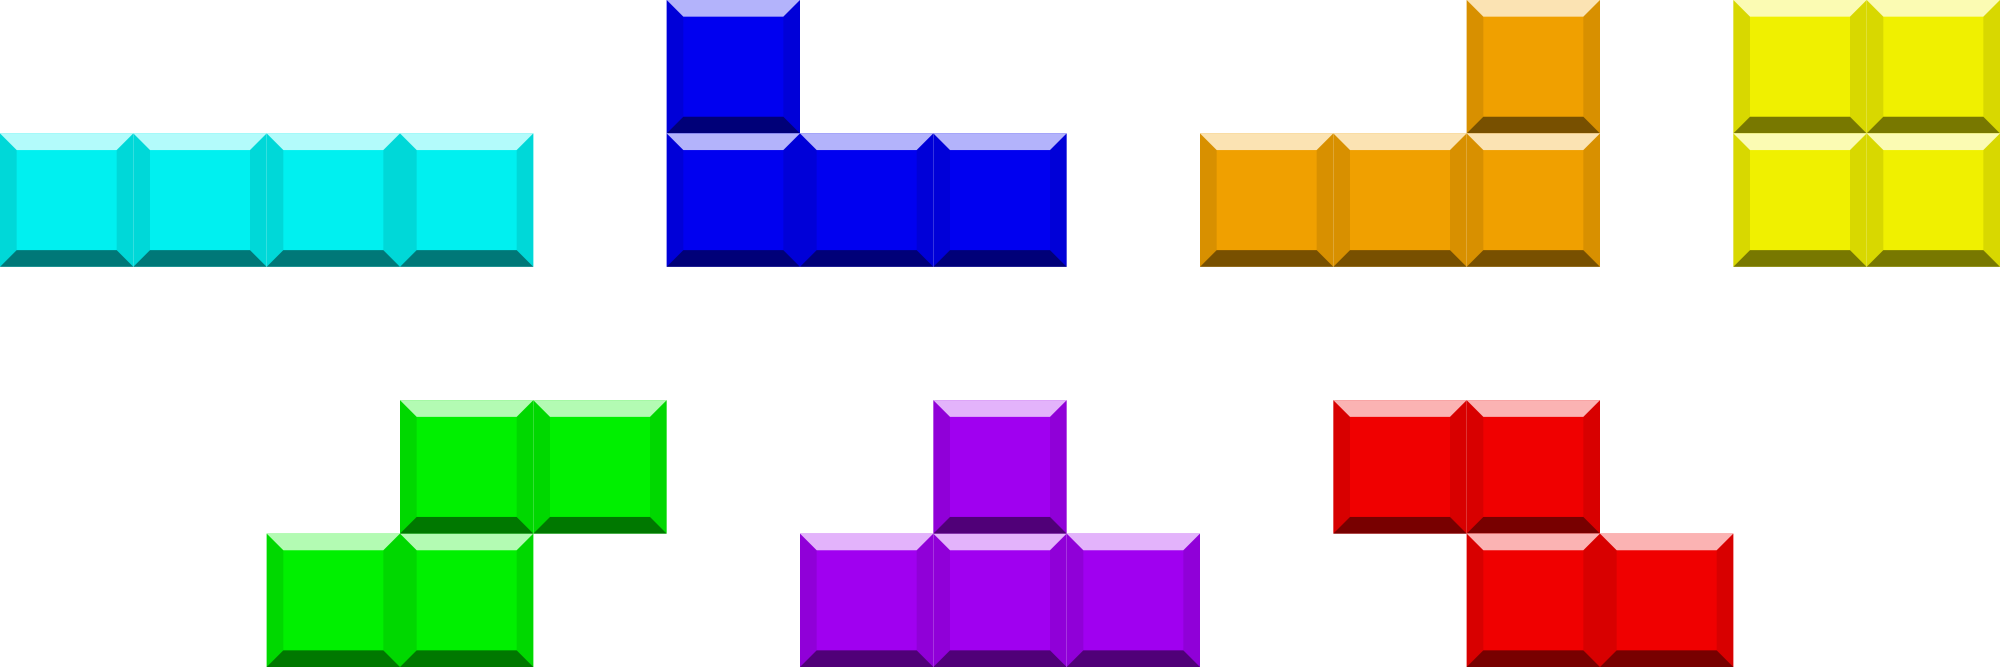 Tetromino Tetris Square Friends Angle HQ Image Free PNG PNG Image